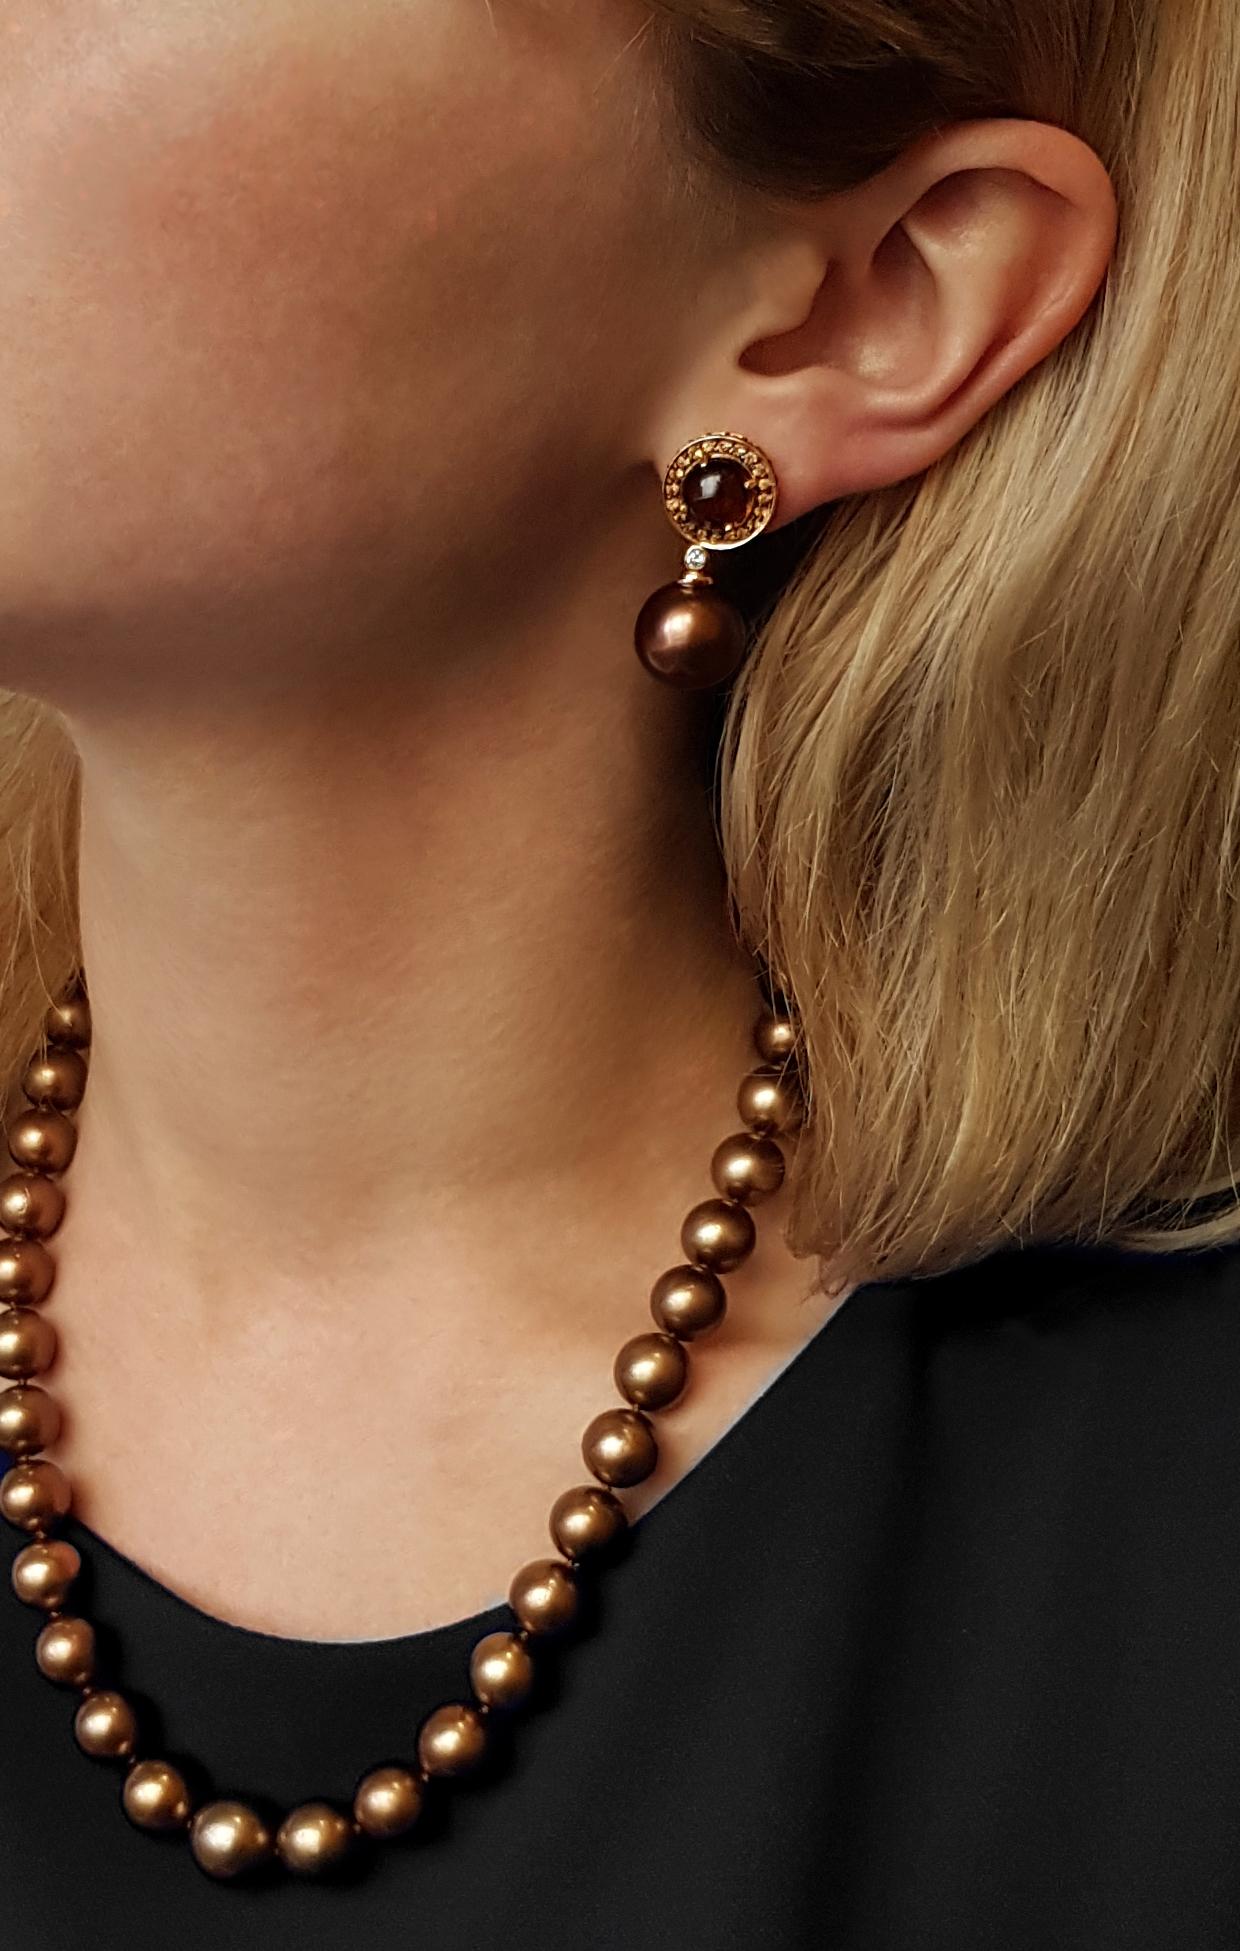 These unusual earrings from Yoko London feature a sumptuous combination of chocolate-coloured Tahitian pearls, cognac quartz and yellow sapphires. To enrich these rich hues further, the earrings are set in 18 Karat yellow gold, allowing the colours